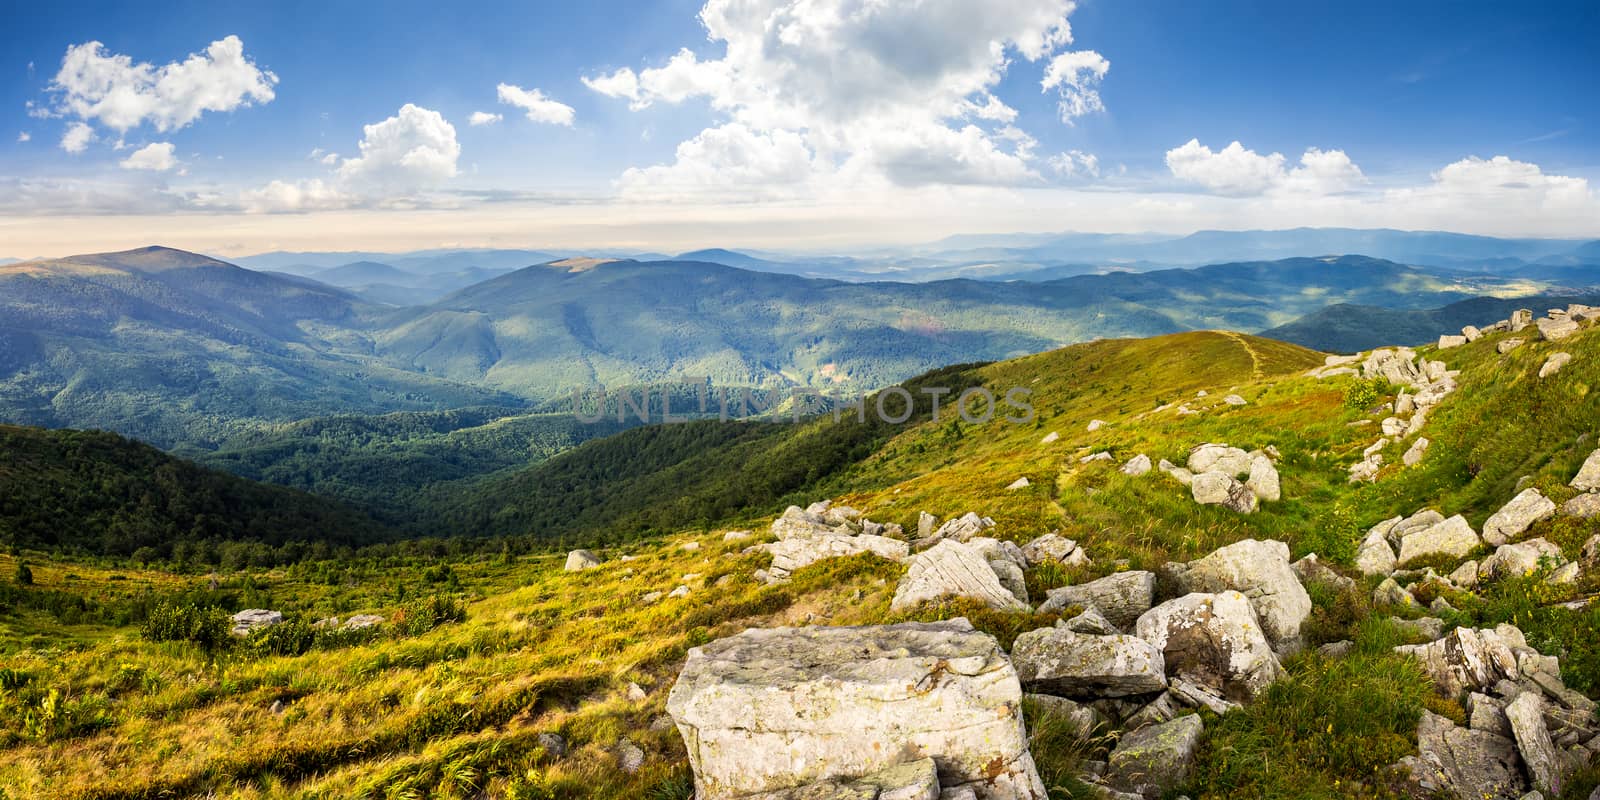 mountain panorama landscape. valley with stones in grass on top of the hillside of mountain range in dappled light